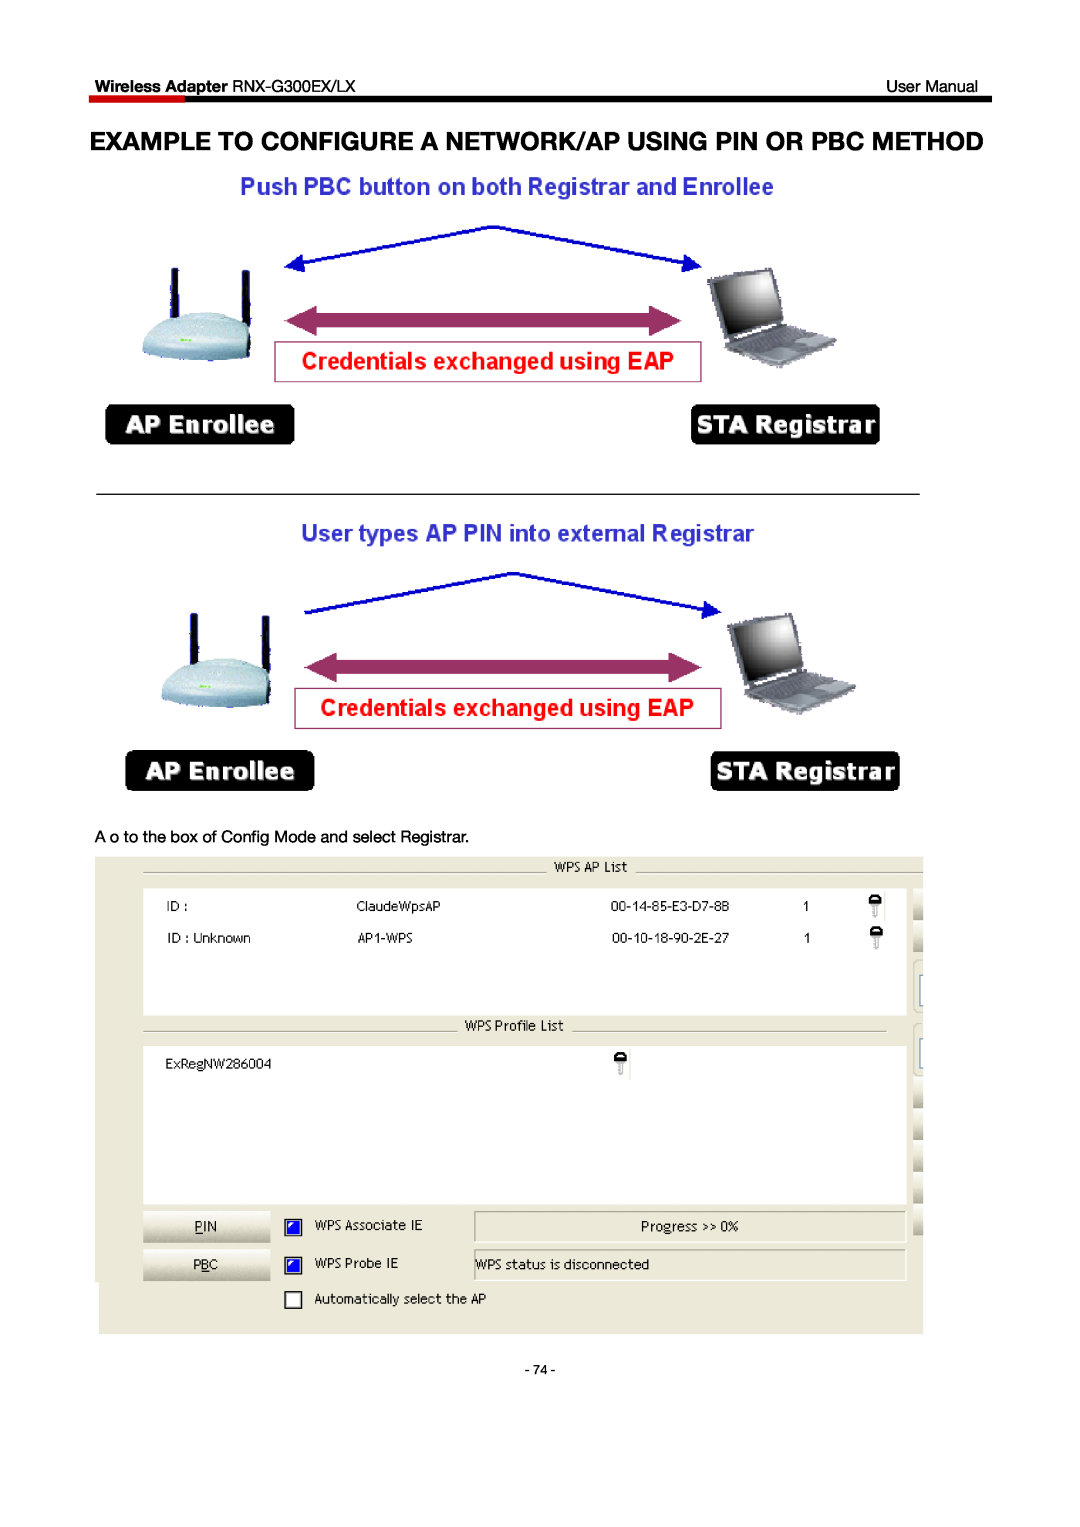 Rosewill RNX-G300EXLX user manual Example To Configure A Network/Ap Using Pin Or Pbc Method, Wireless Adapter RNX-G300EX/LX 